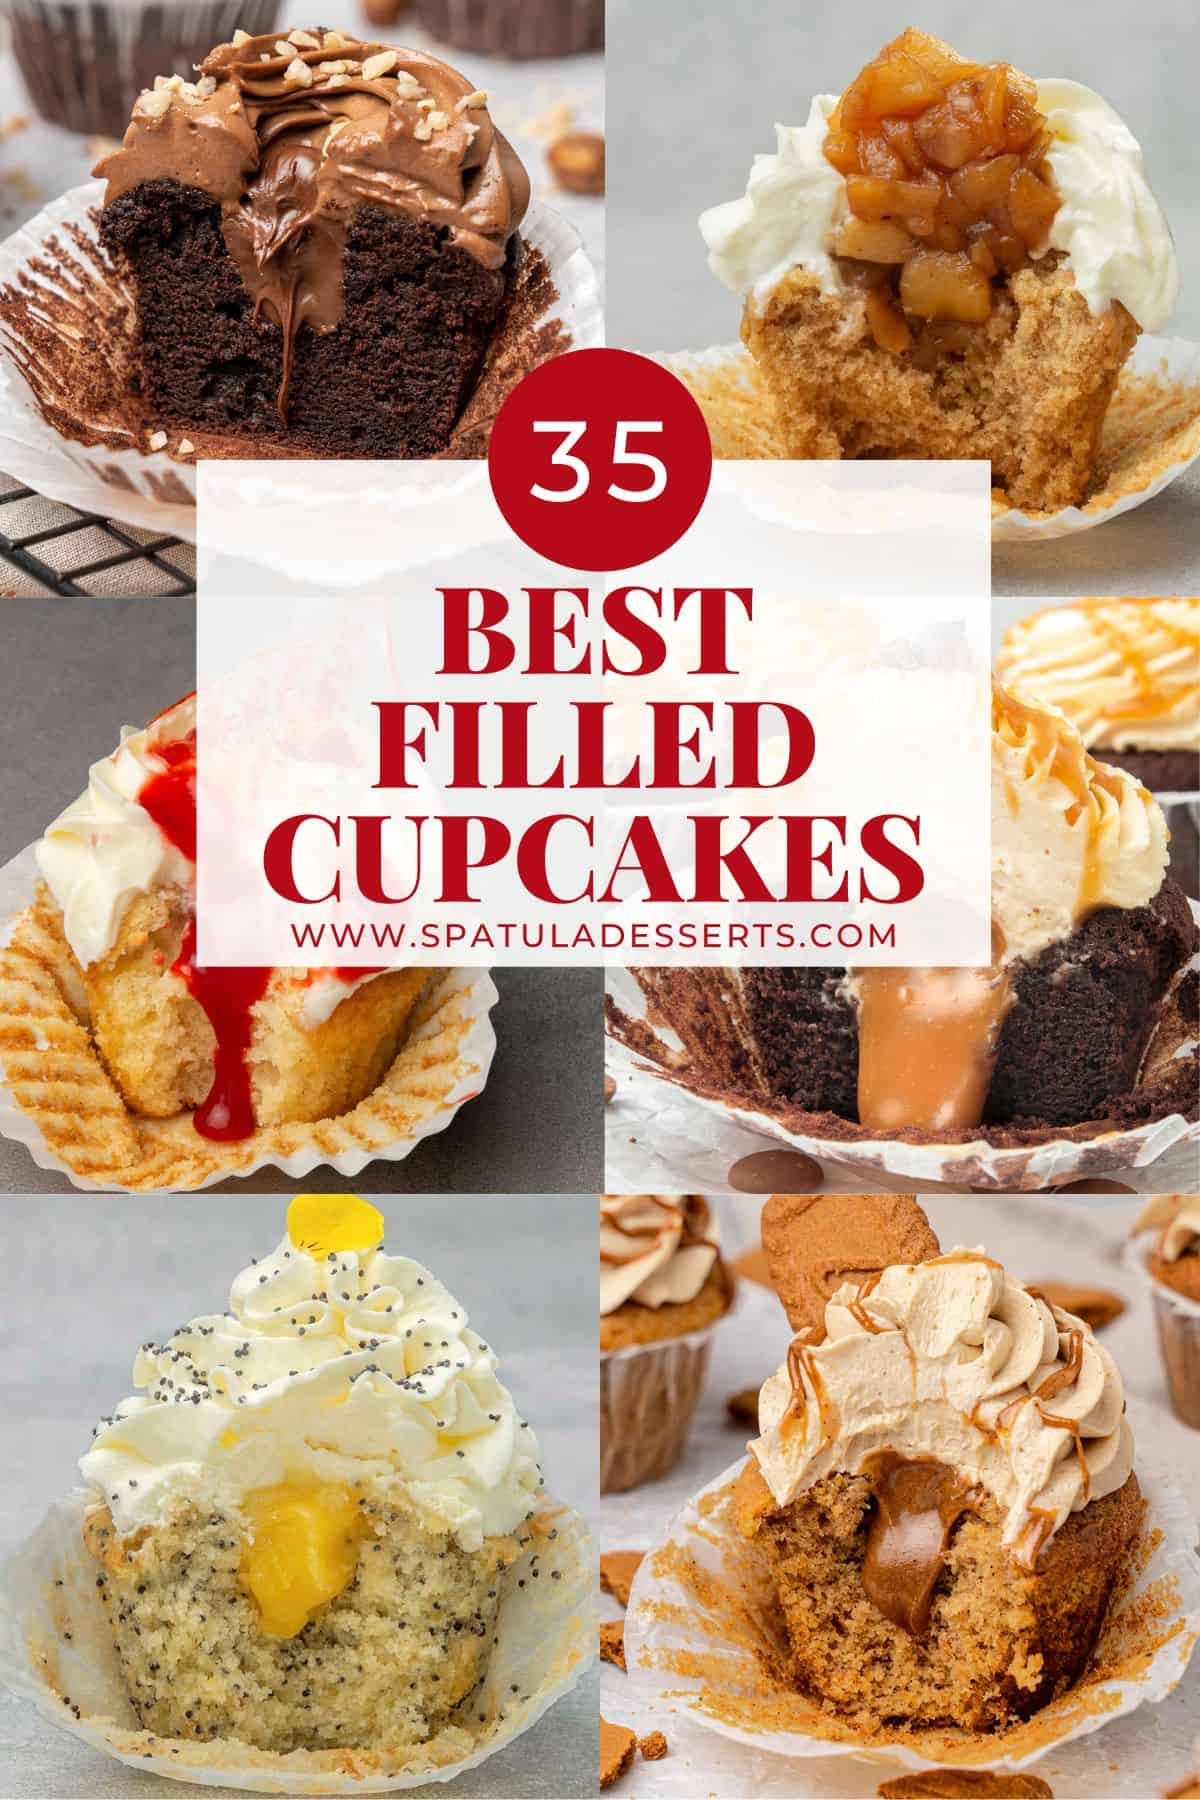 Filled cupcakes recipe collection.